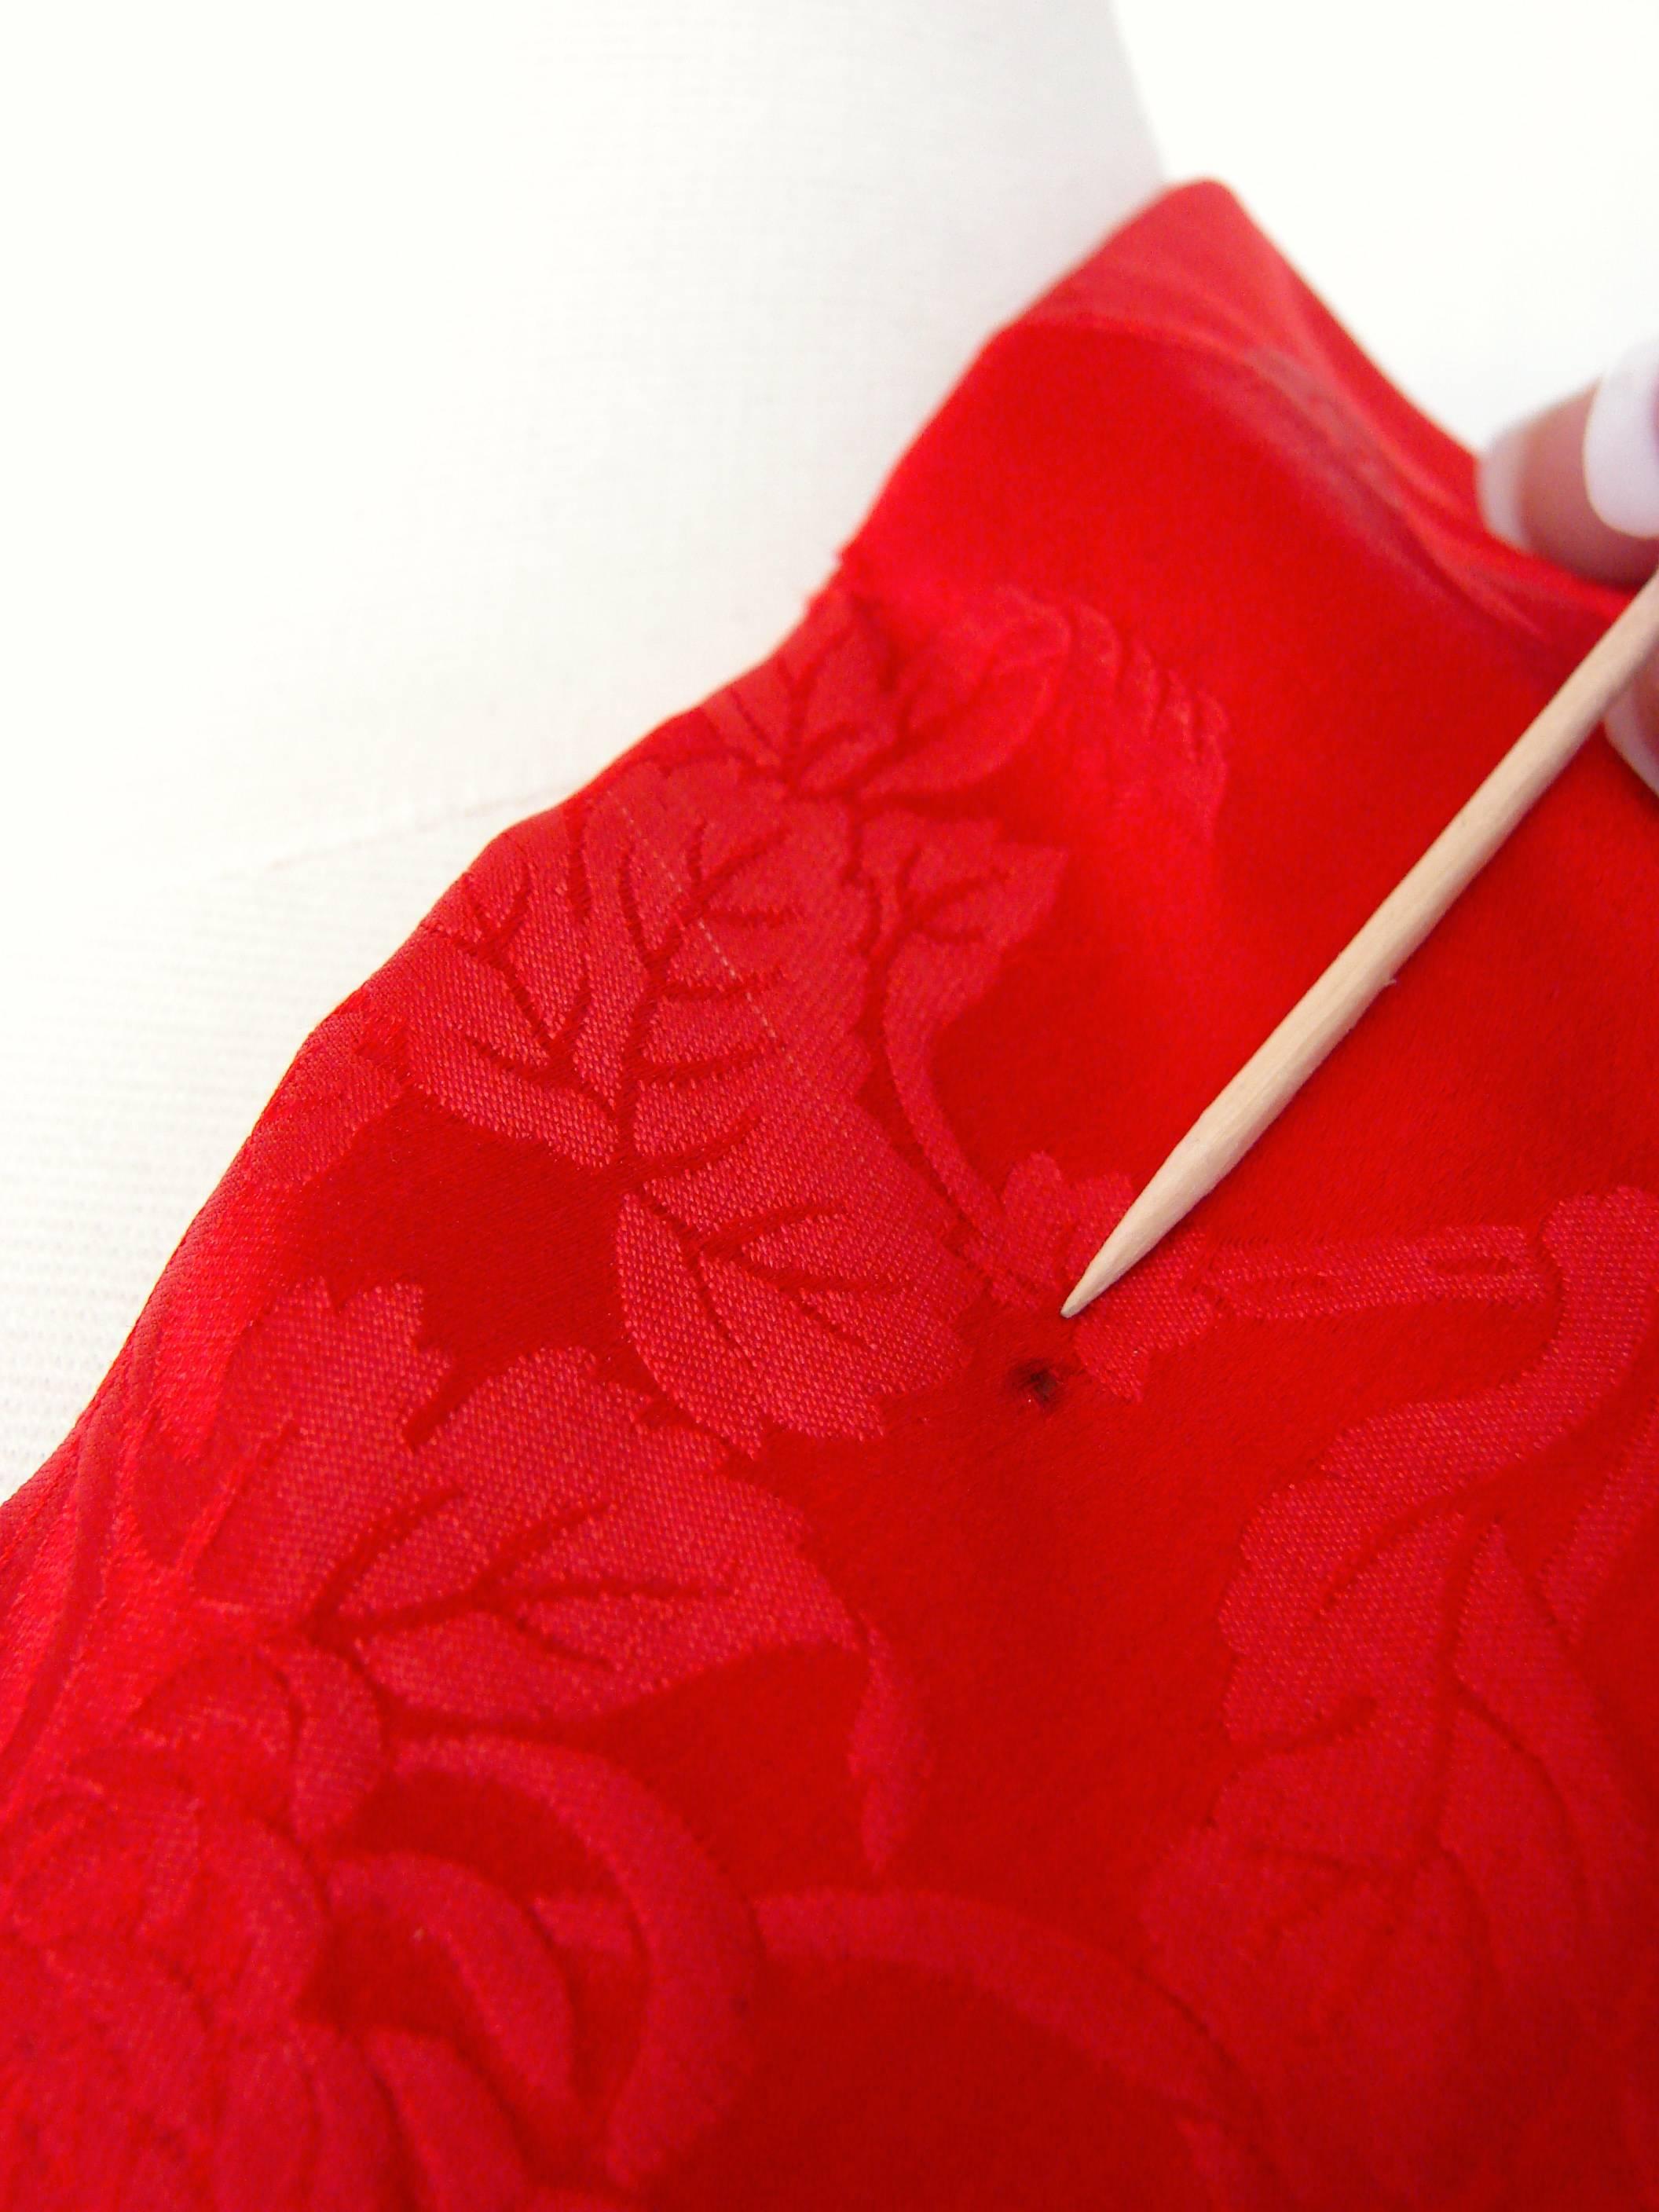 Dynasty for Lord & Taylor Vivid Red Silk Dress with Flared Skirt 1960s Size M 5